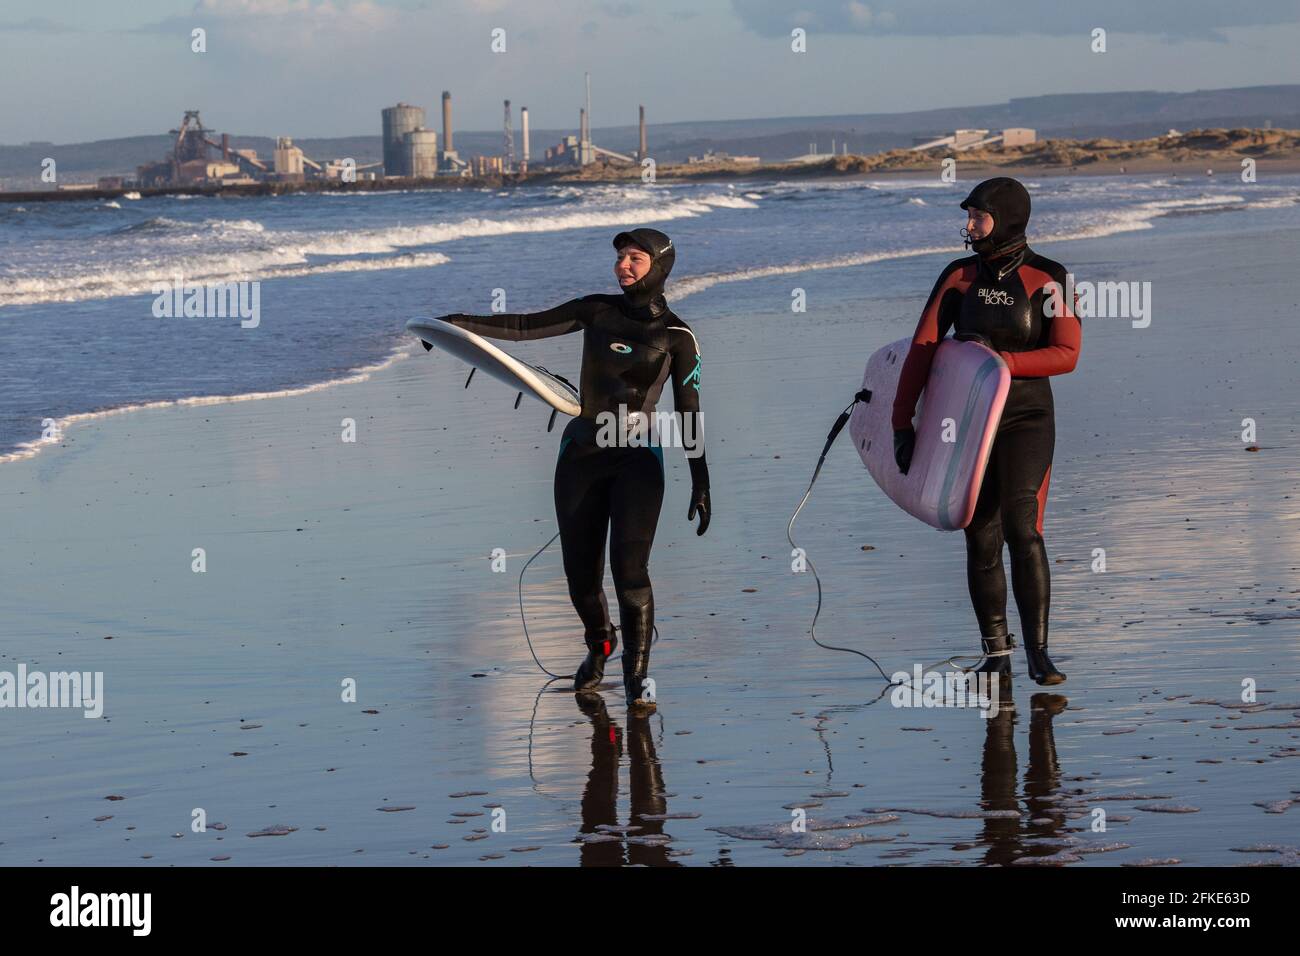 Olivia Harris (Left) and her friend Rachel surfing at Seaton Carew, north east England with Redcar Steelworks in distance. Stock Photo